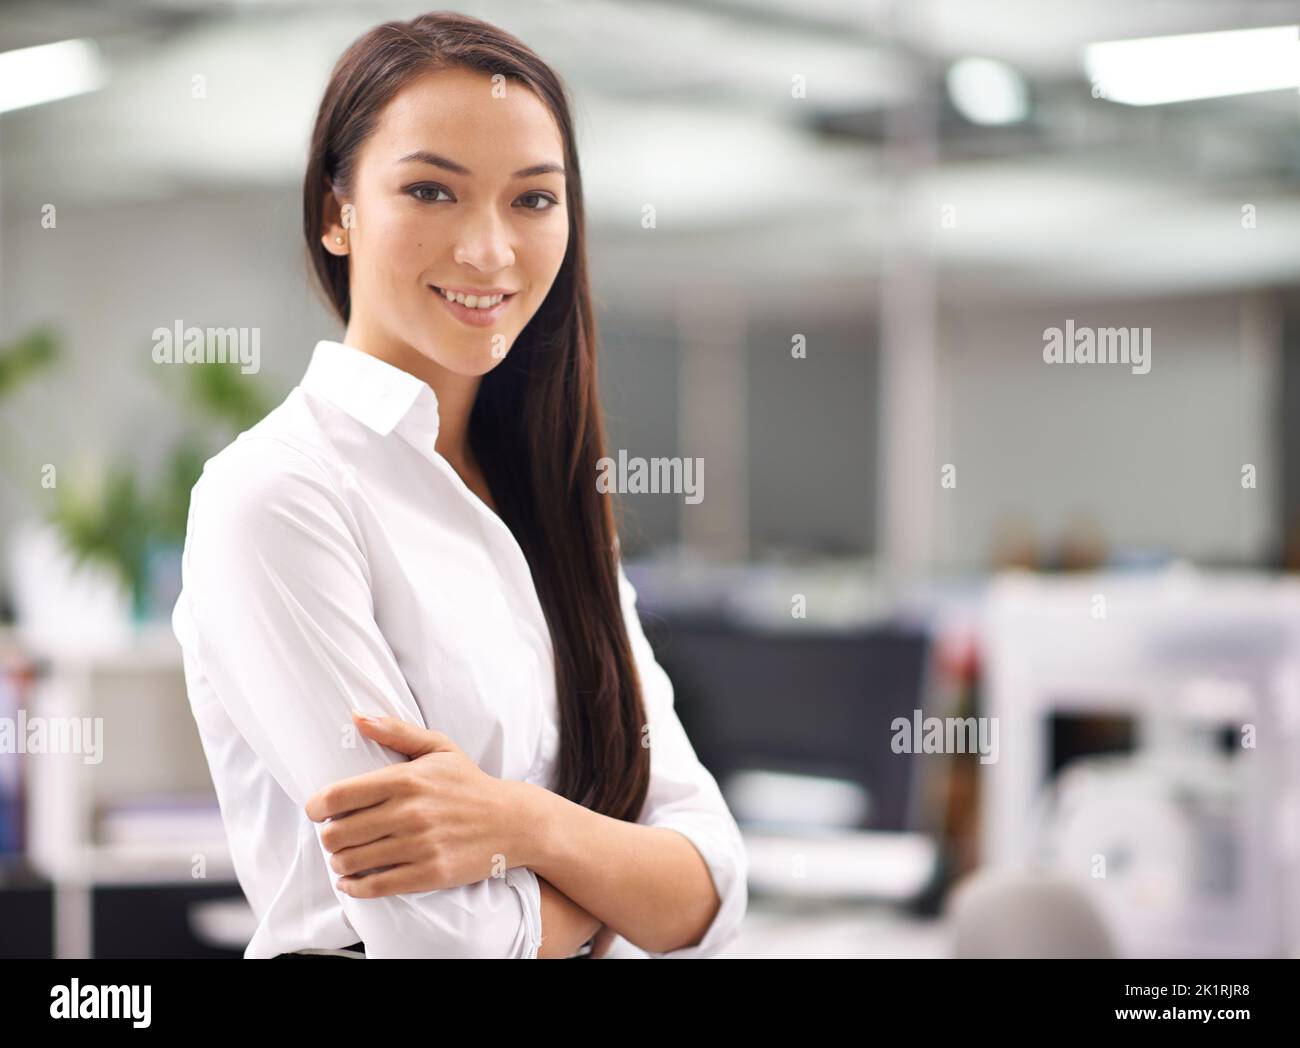 Theres no misplaced confidence here. Portrait of an attractive young businesswoman standing with her arms folded in the office. Stock Photo